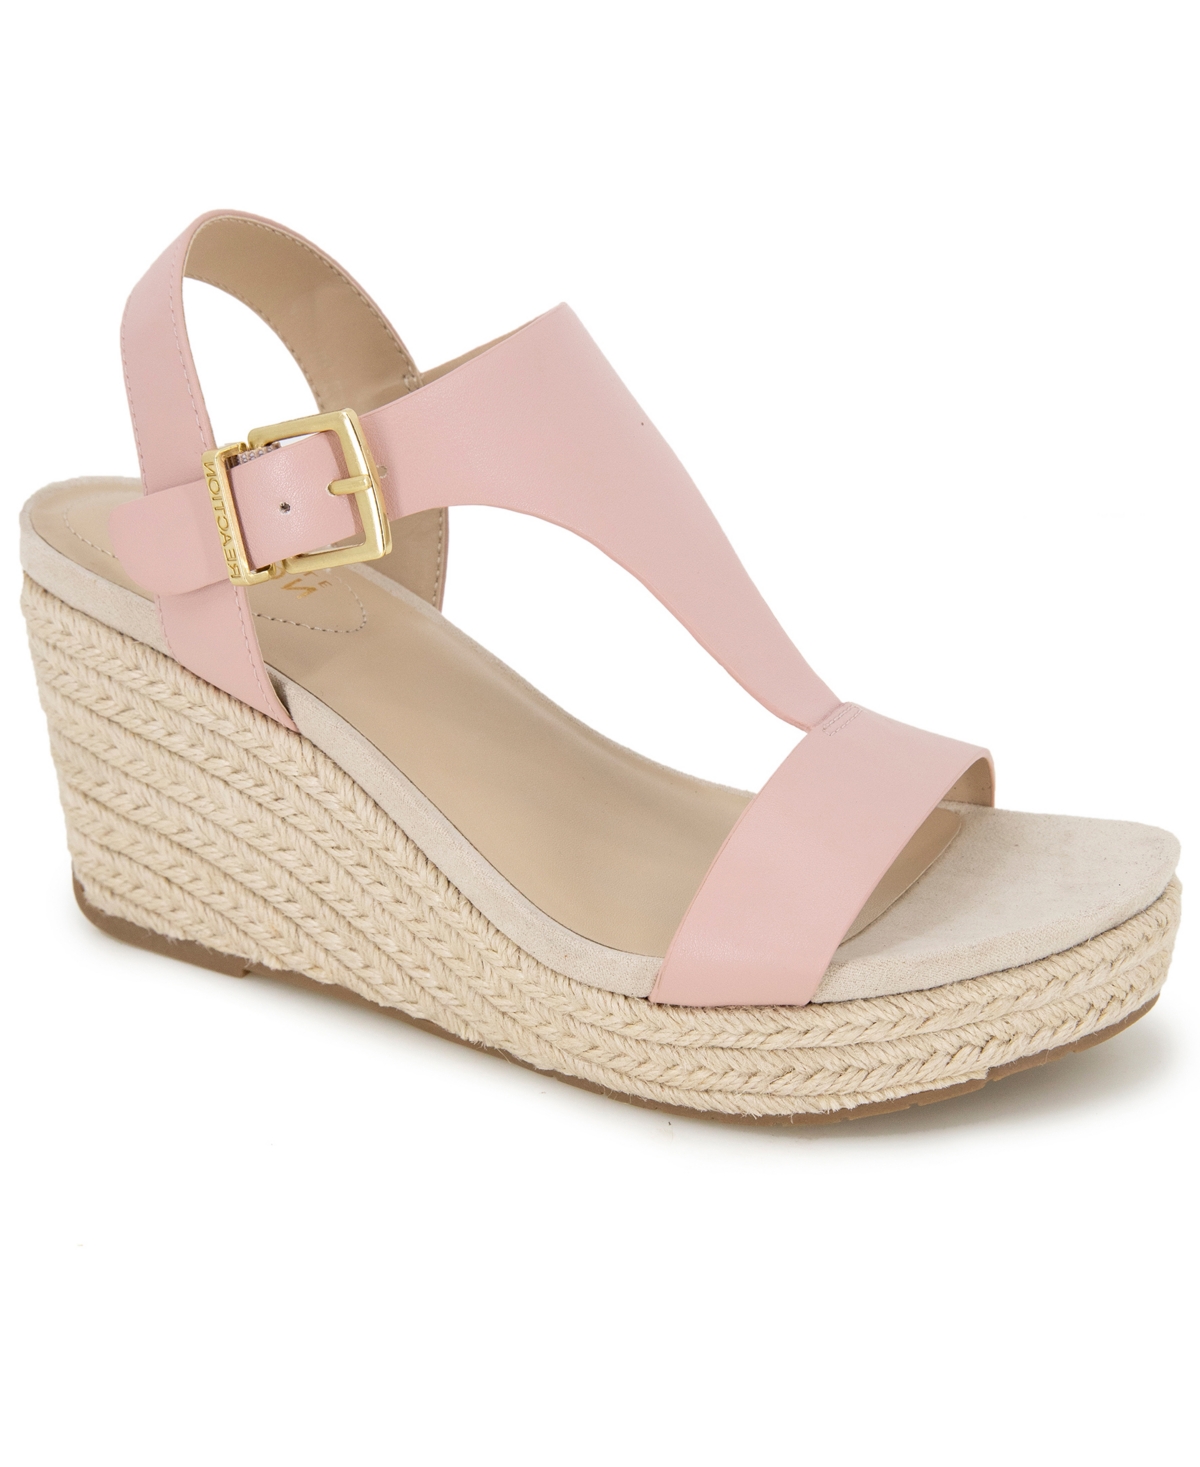 KENNETH COLE REACTION WOMEN'S CARD WEDGE ESPADRILLE SANDALS